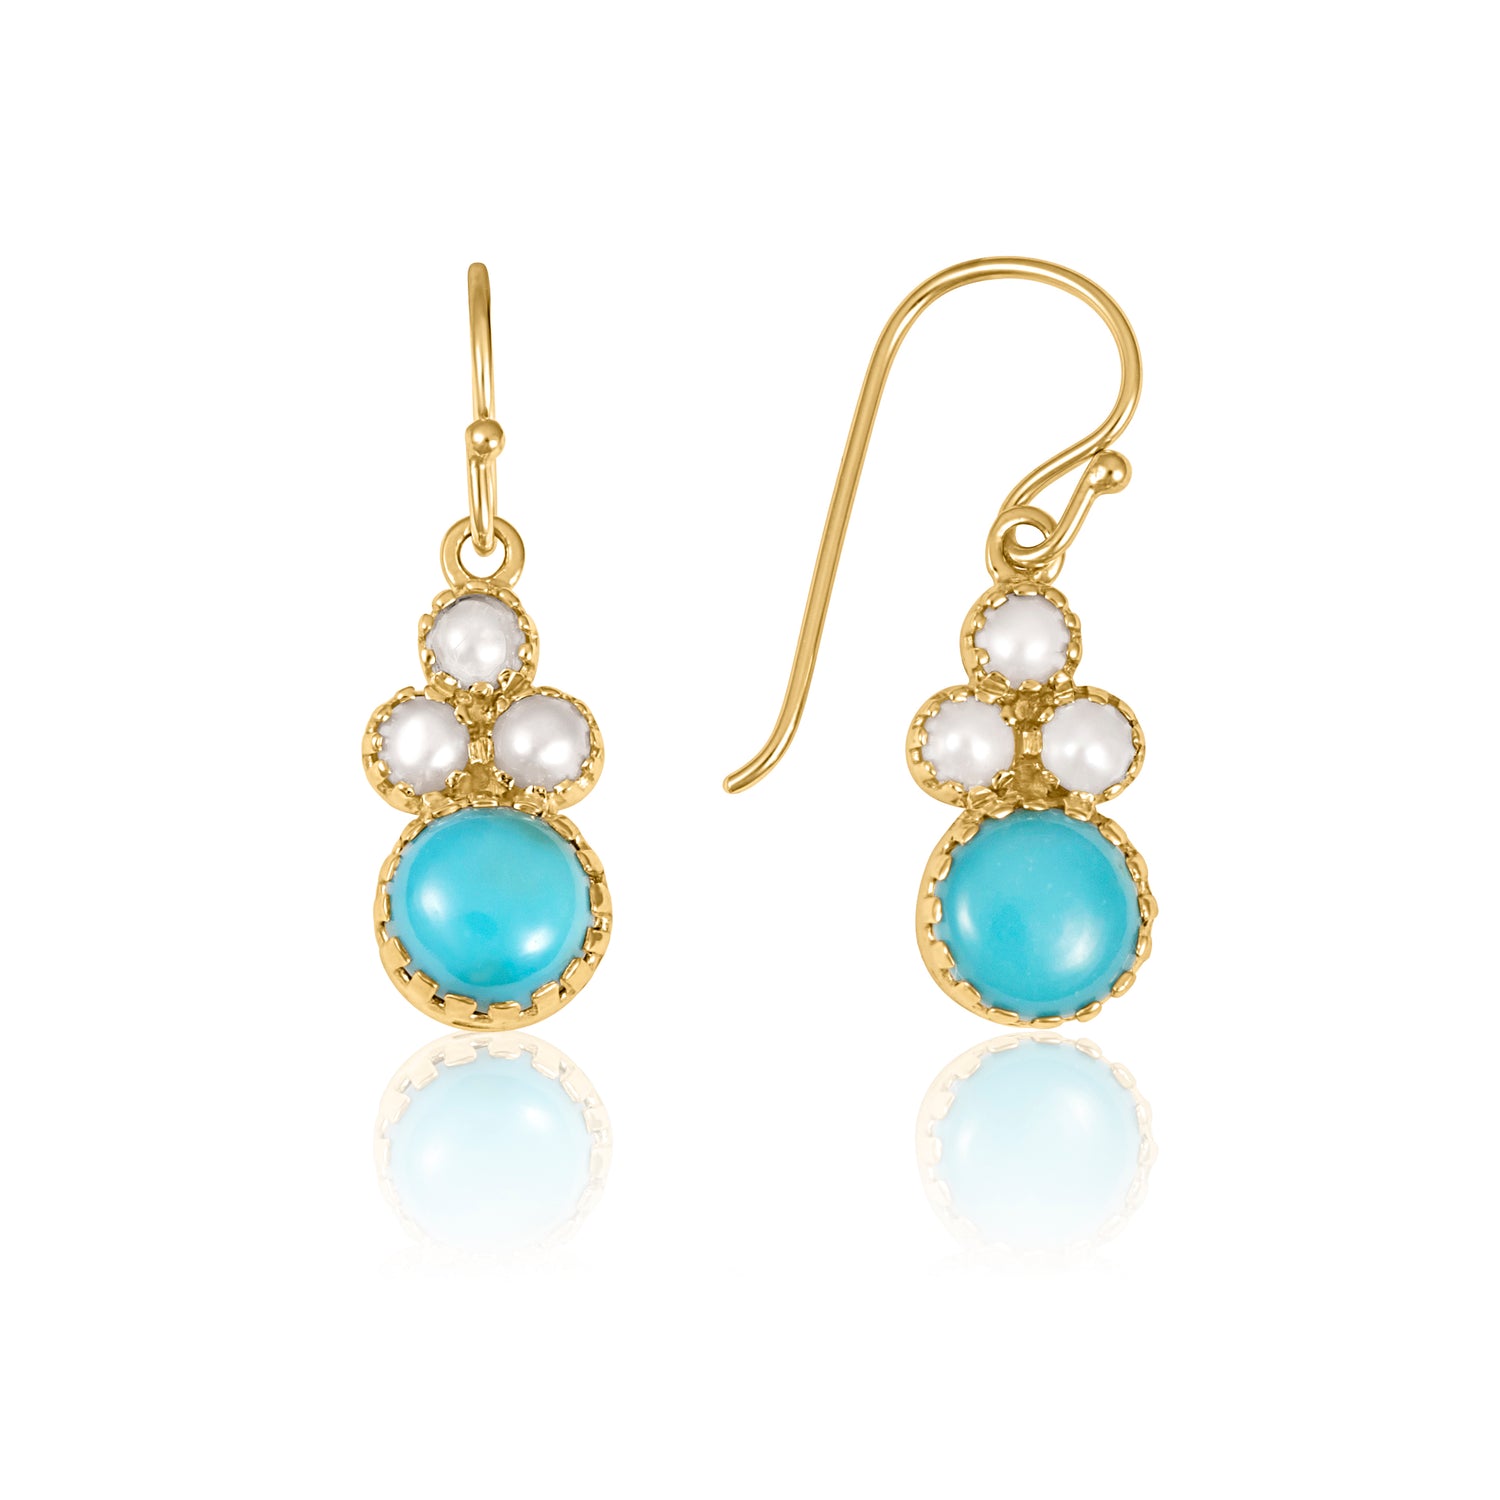 9ct Gold Turquoise and Pearl Drop Earrings - Robert Anthony Jewellers, Edinburgh